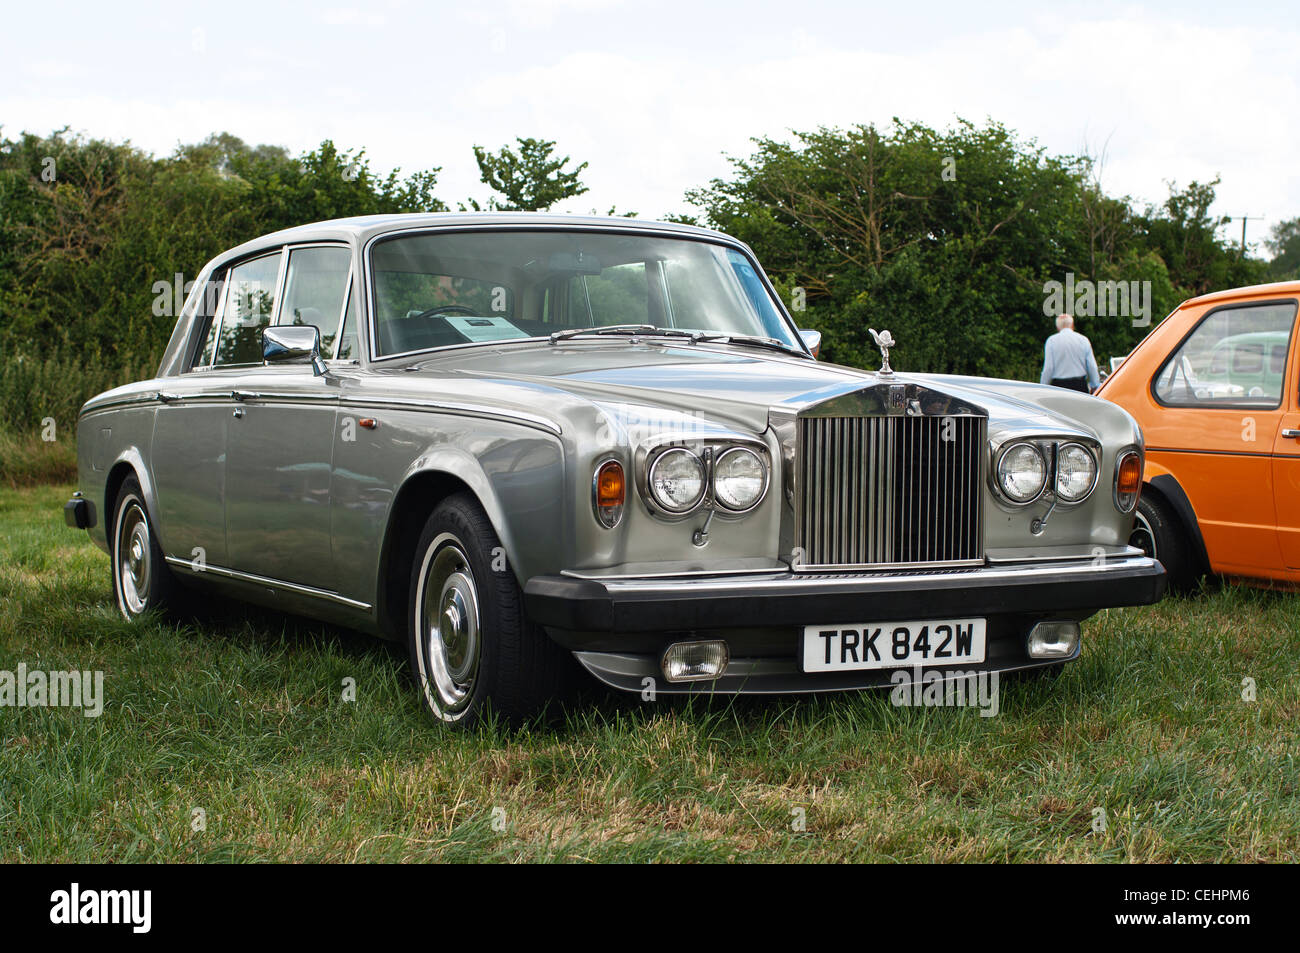 Old Rolls Royce from 1980s in UK Stock Photo - Alamy